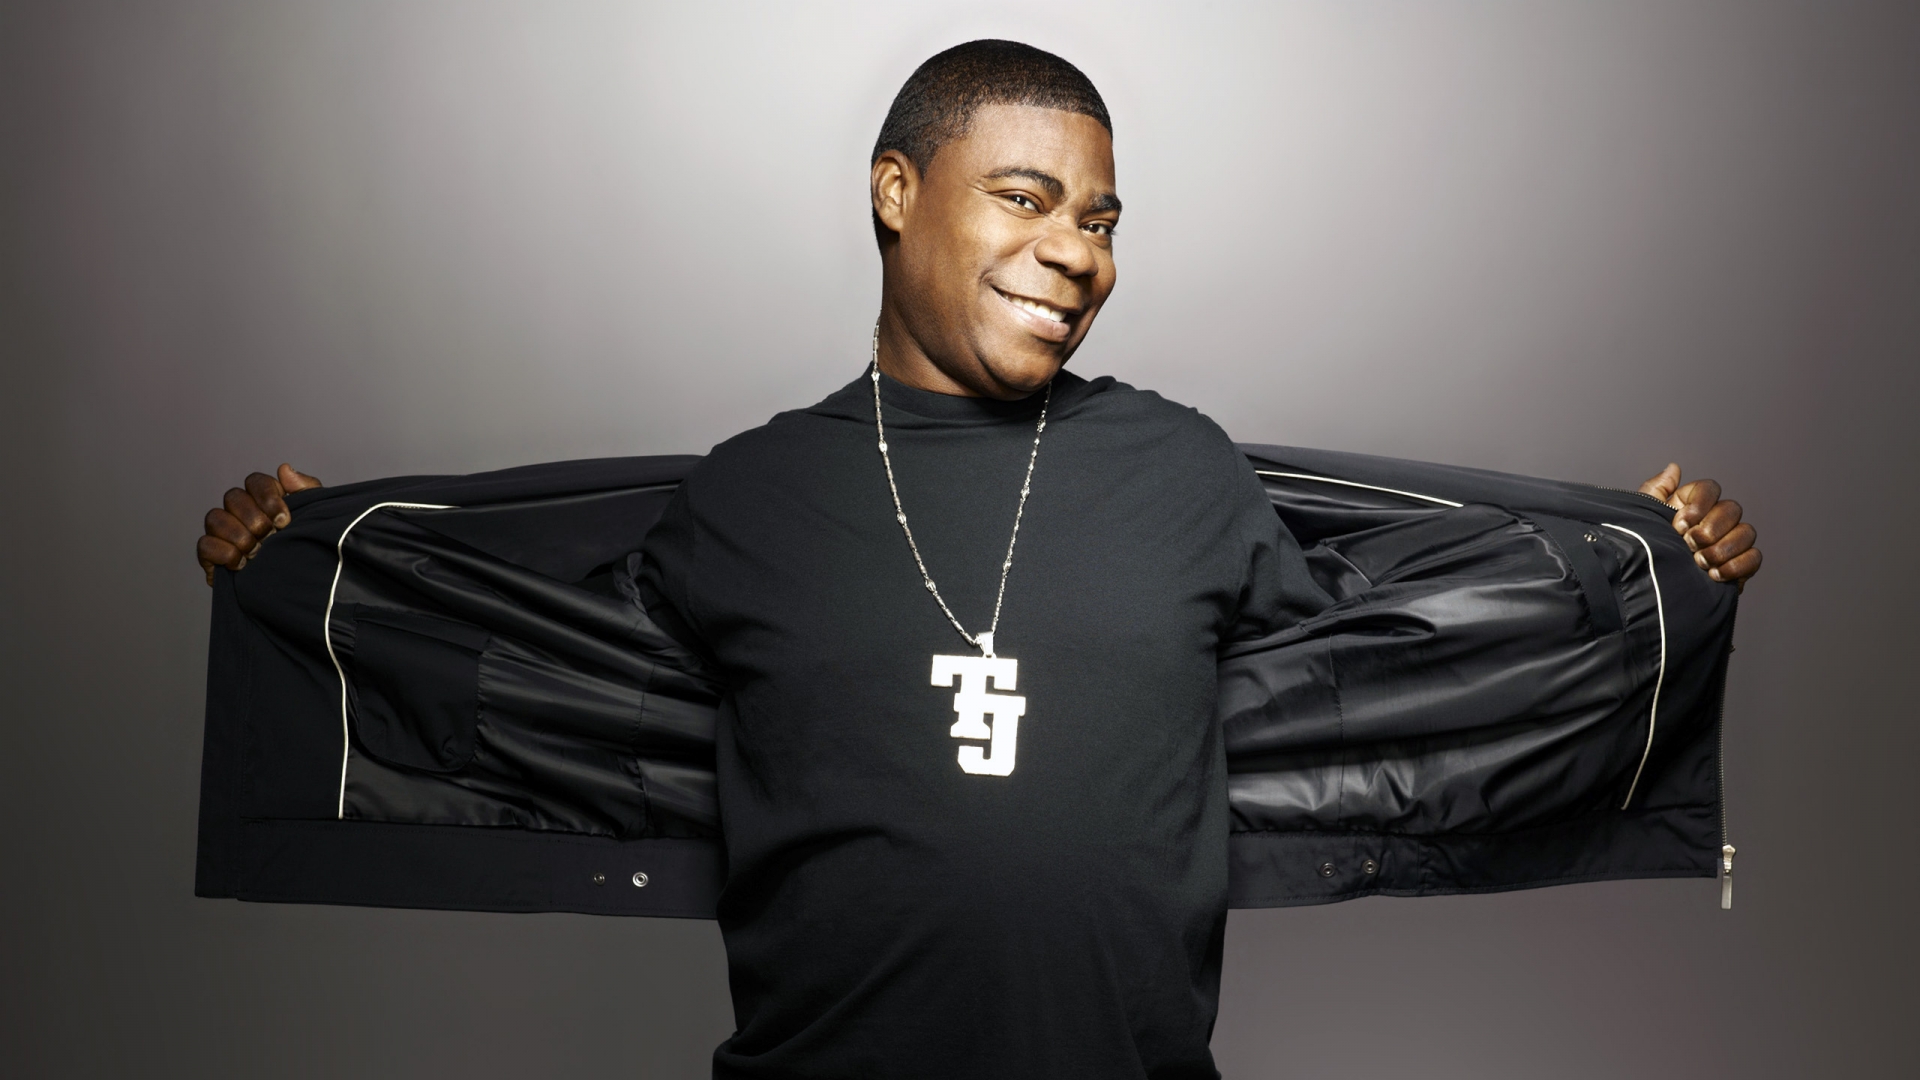 Tracy Morgan for 1920 x 1080 HDTV 1080p resolution